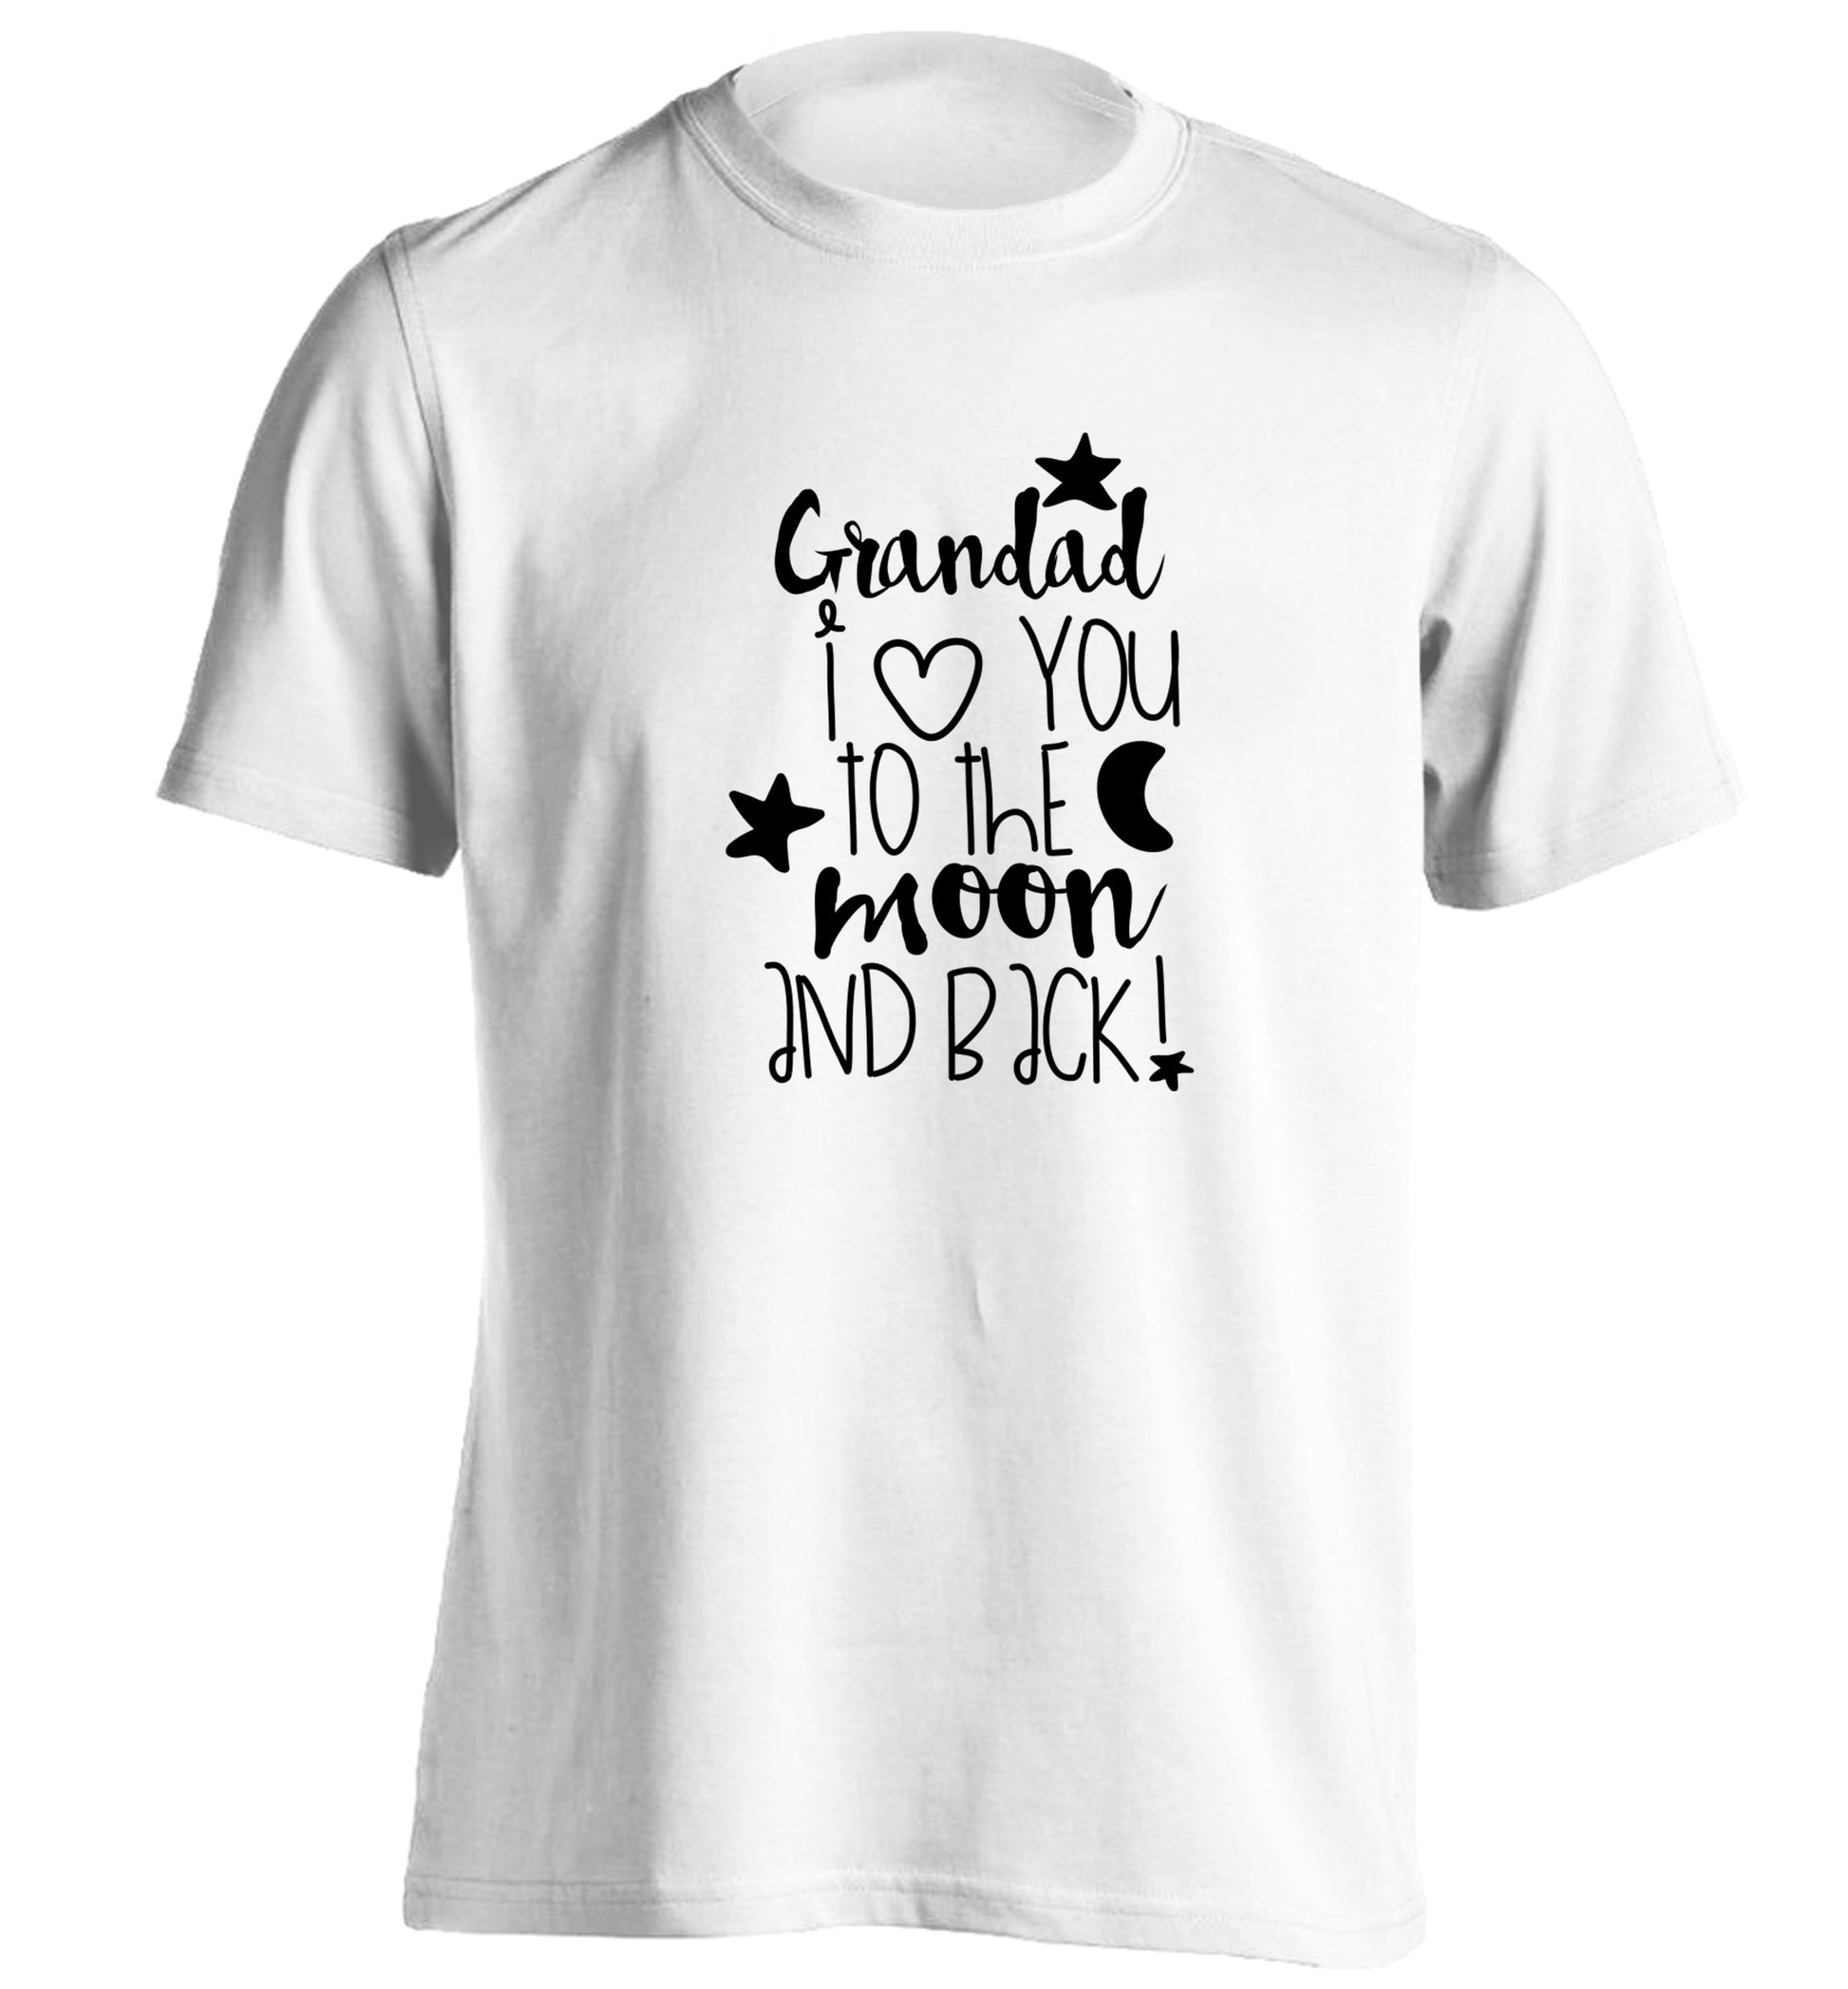 Grandad's I love you to the moon and back adults unisex white Tshirt 2XL